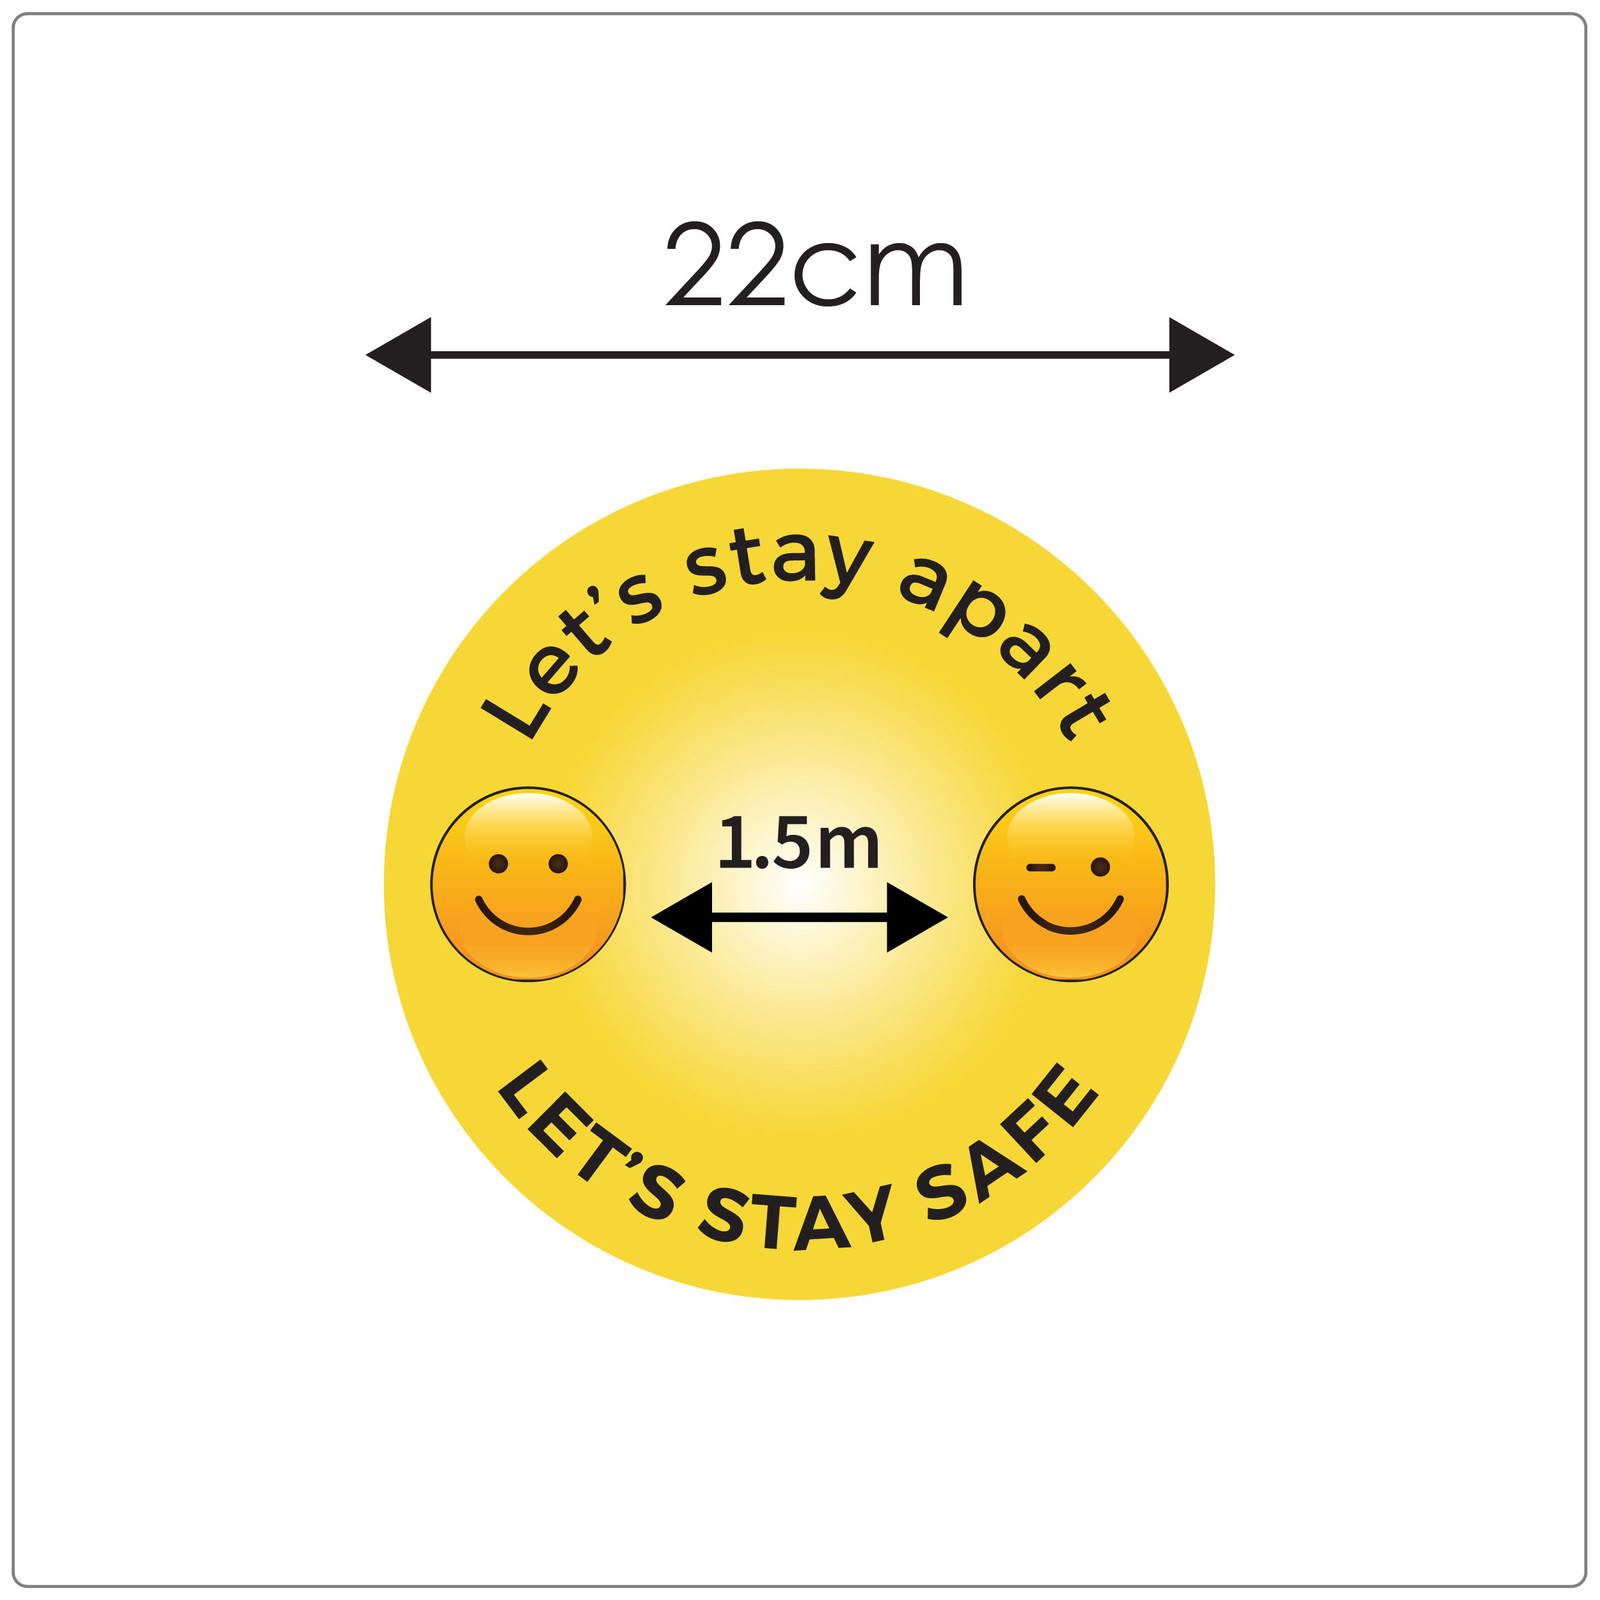 1.5 meter social distancing floor sign for carpet, size, emoji
Self-adhesive Corona floor marker
safety floor sticker for COVID-19